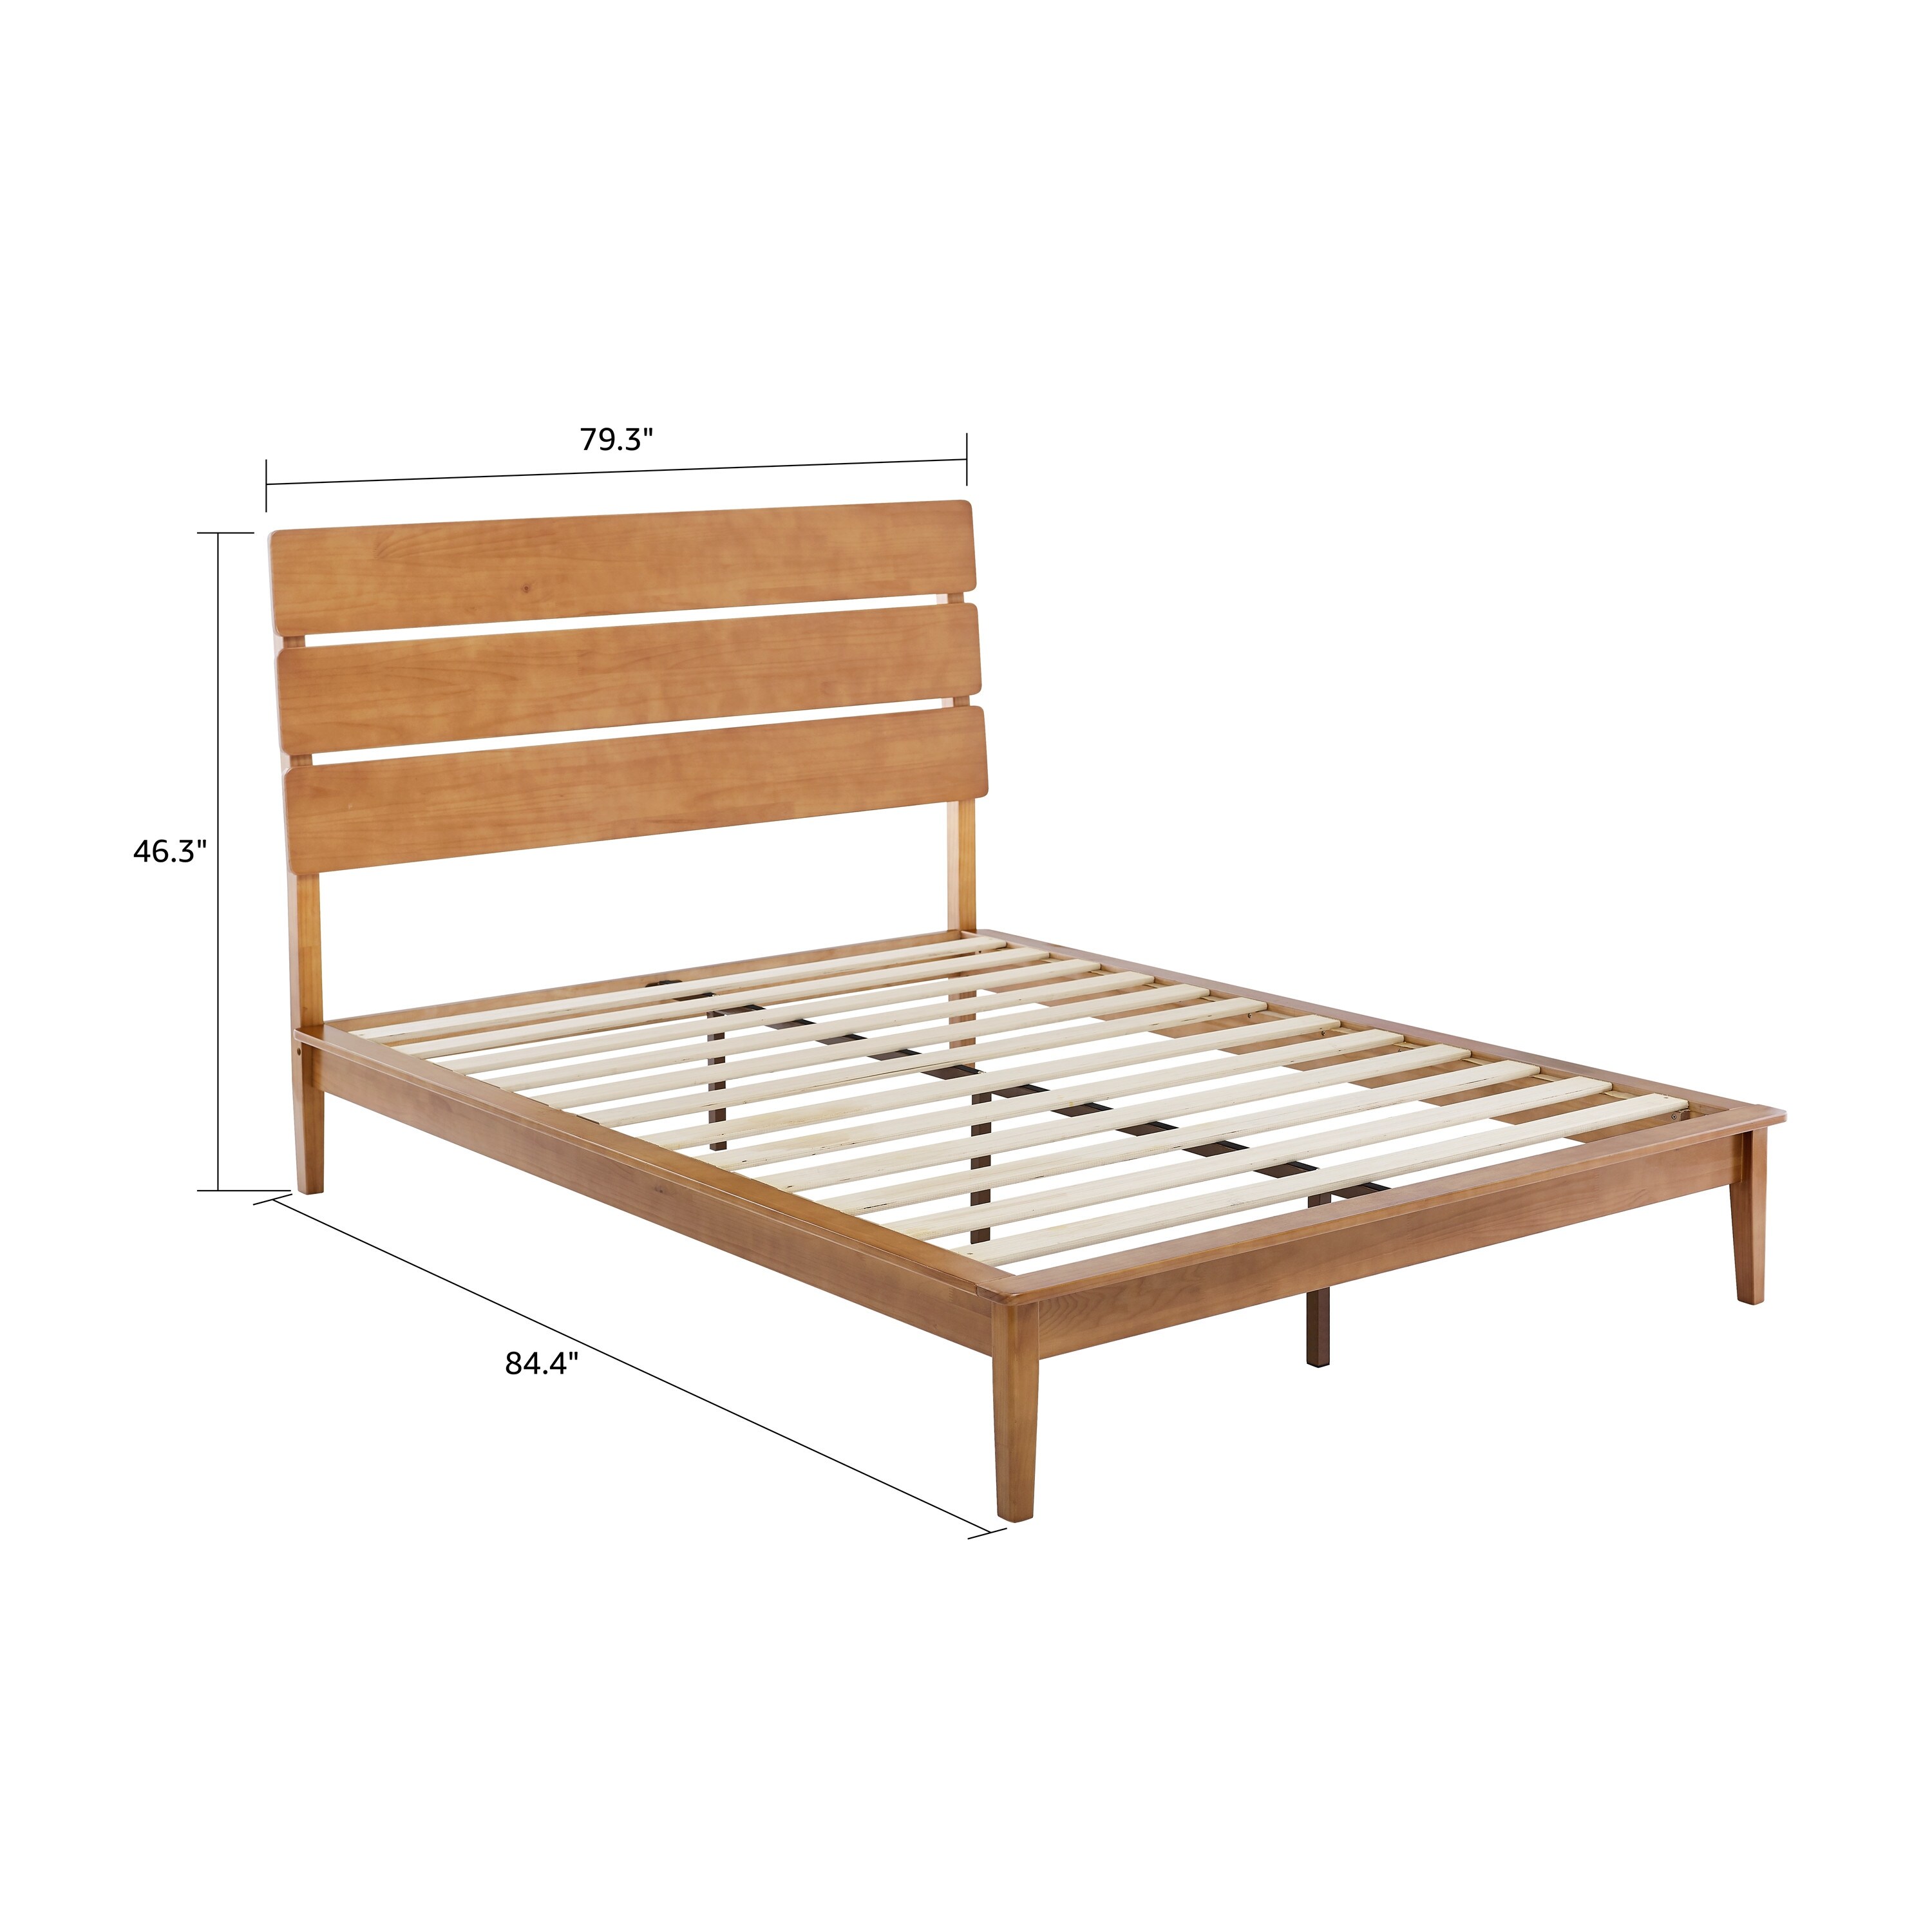 BIKAHOM Mid-Century Modern Solid Wooden Platform Bed with Headboard ,Full/Queen/King Size Bed Frame with Headboard